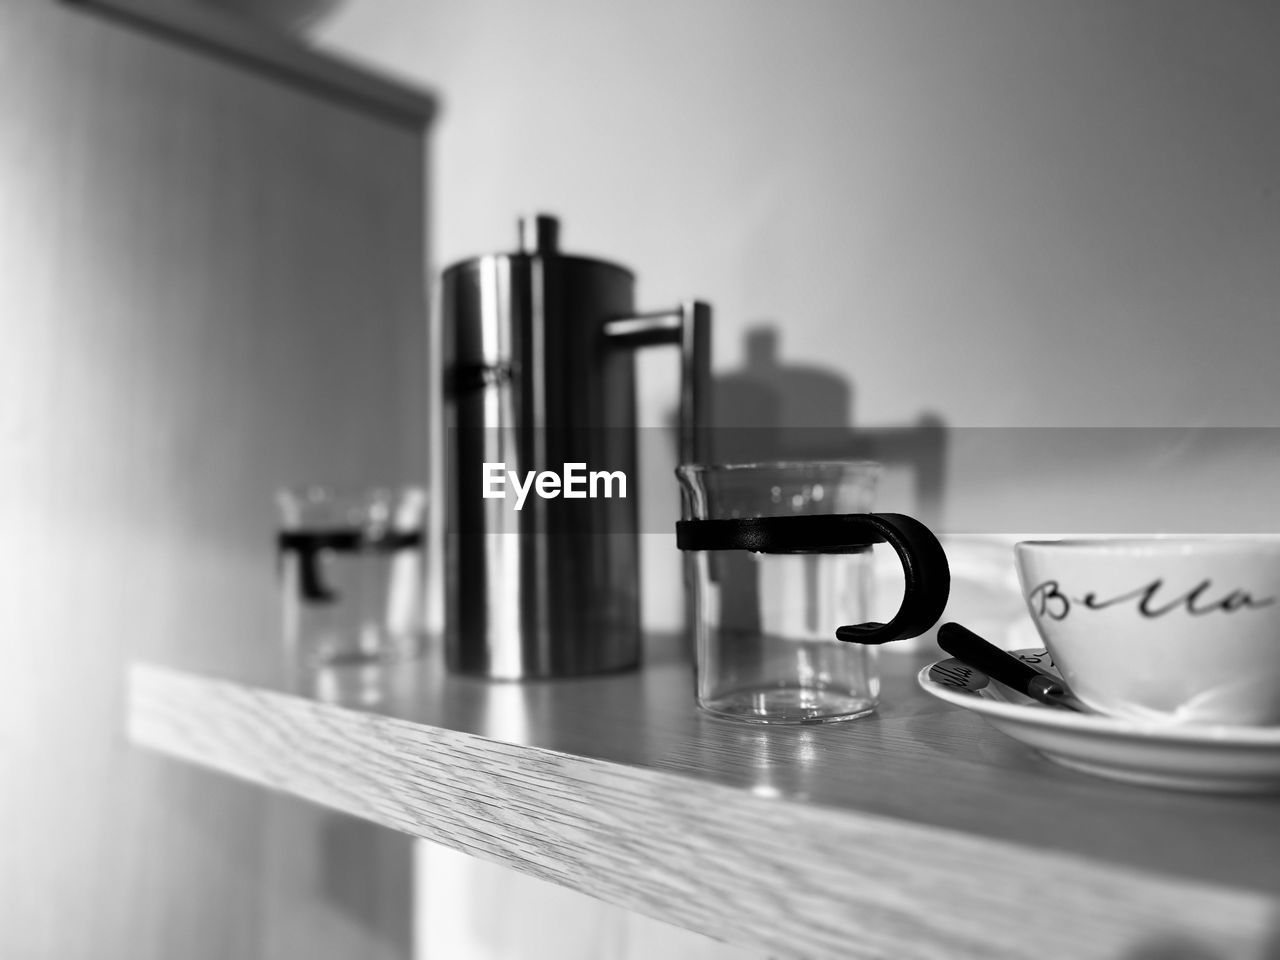 indoors, black and white, food and drink, cup, mug, table, coffee cup, room, drink, no people, monochrome, coffee, household equipment, monochrome photography, domestic room, home interior, tap, still life photography, refreshment, home, still life, white, small appliance, tableware, close-up, domestic life, kitchen, selective focus, domestic kitchen, kitchen utensil, coffeemaker, crockery